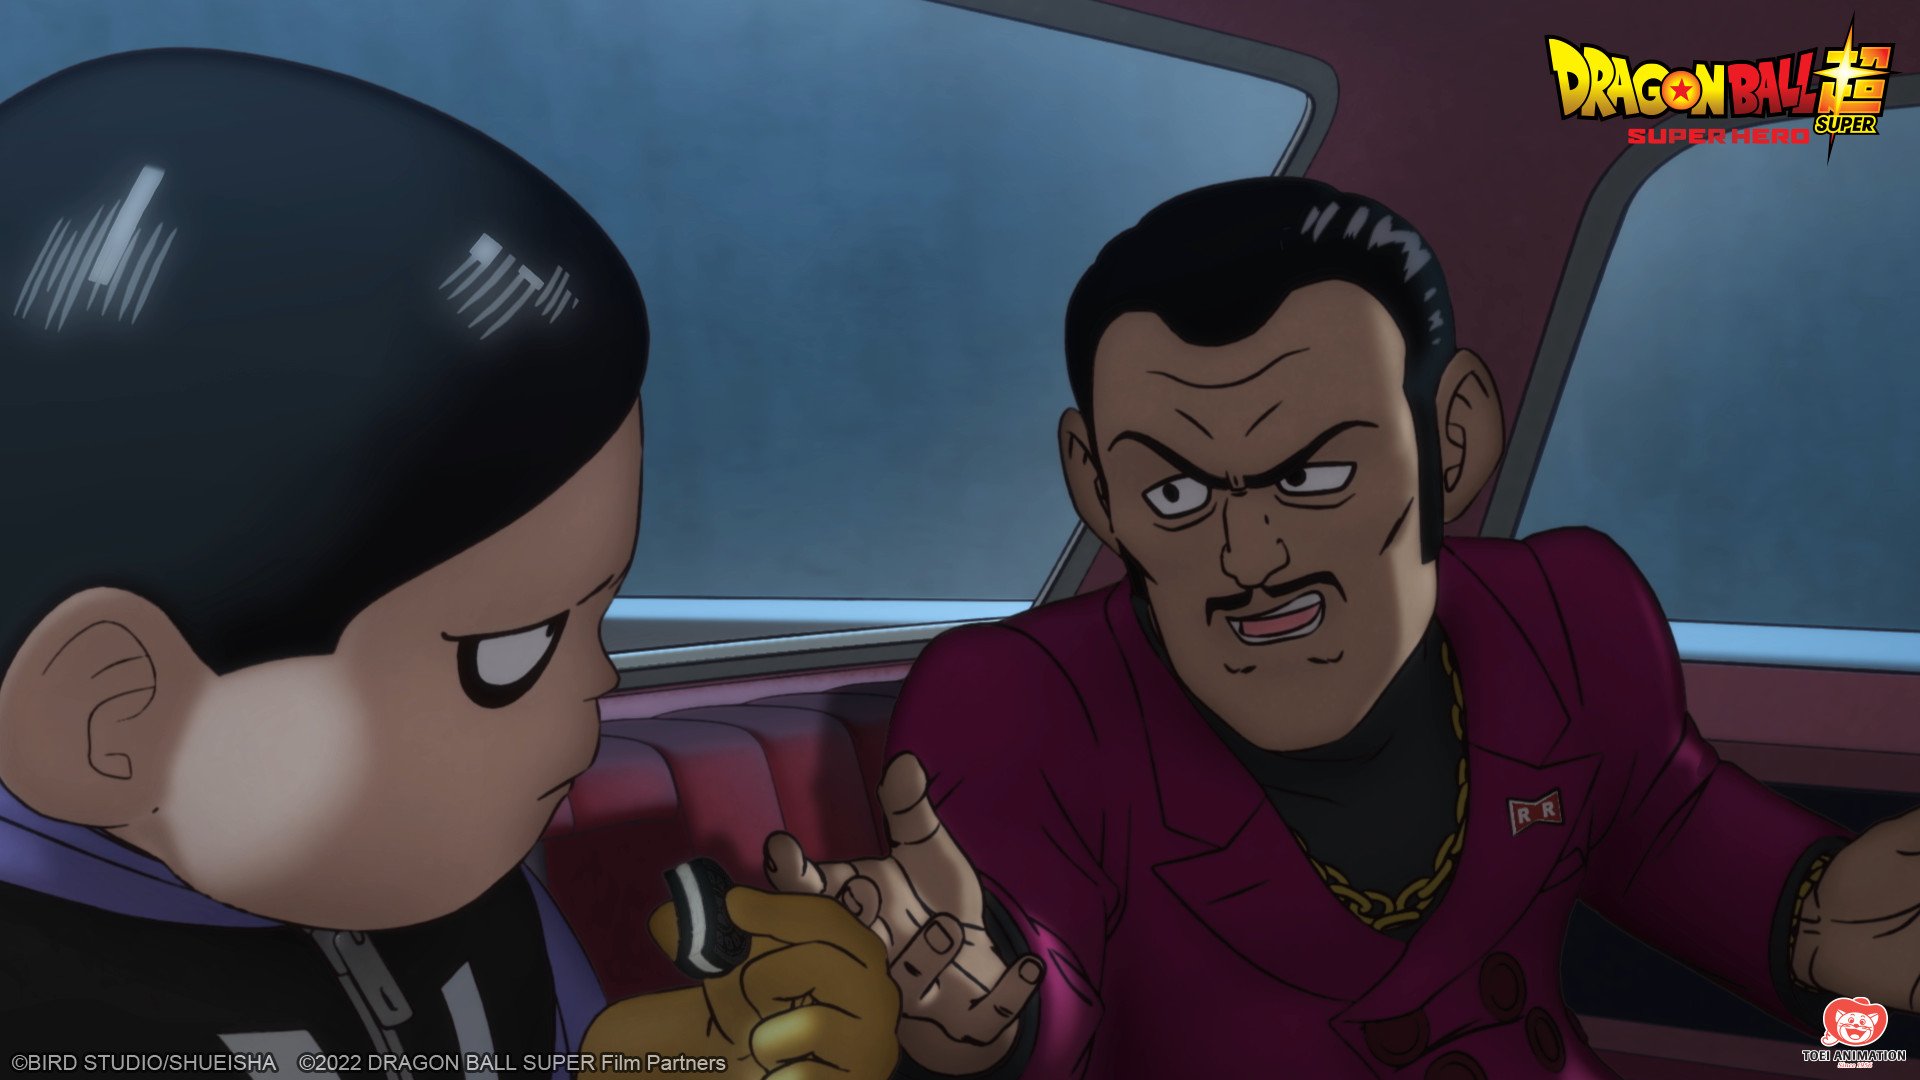 Dr. Hedo and Magenta, two new characters from 'Dragon Ball Super: Super Hero.' They're talking to one another in the backseat of a car.